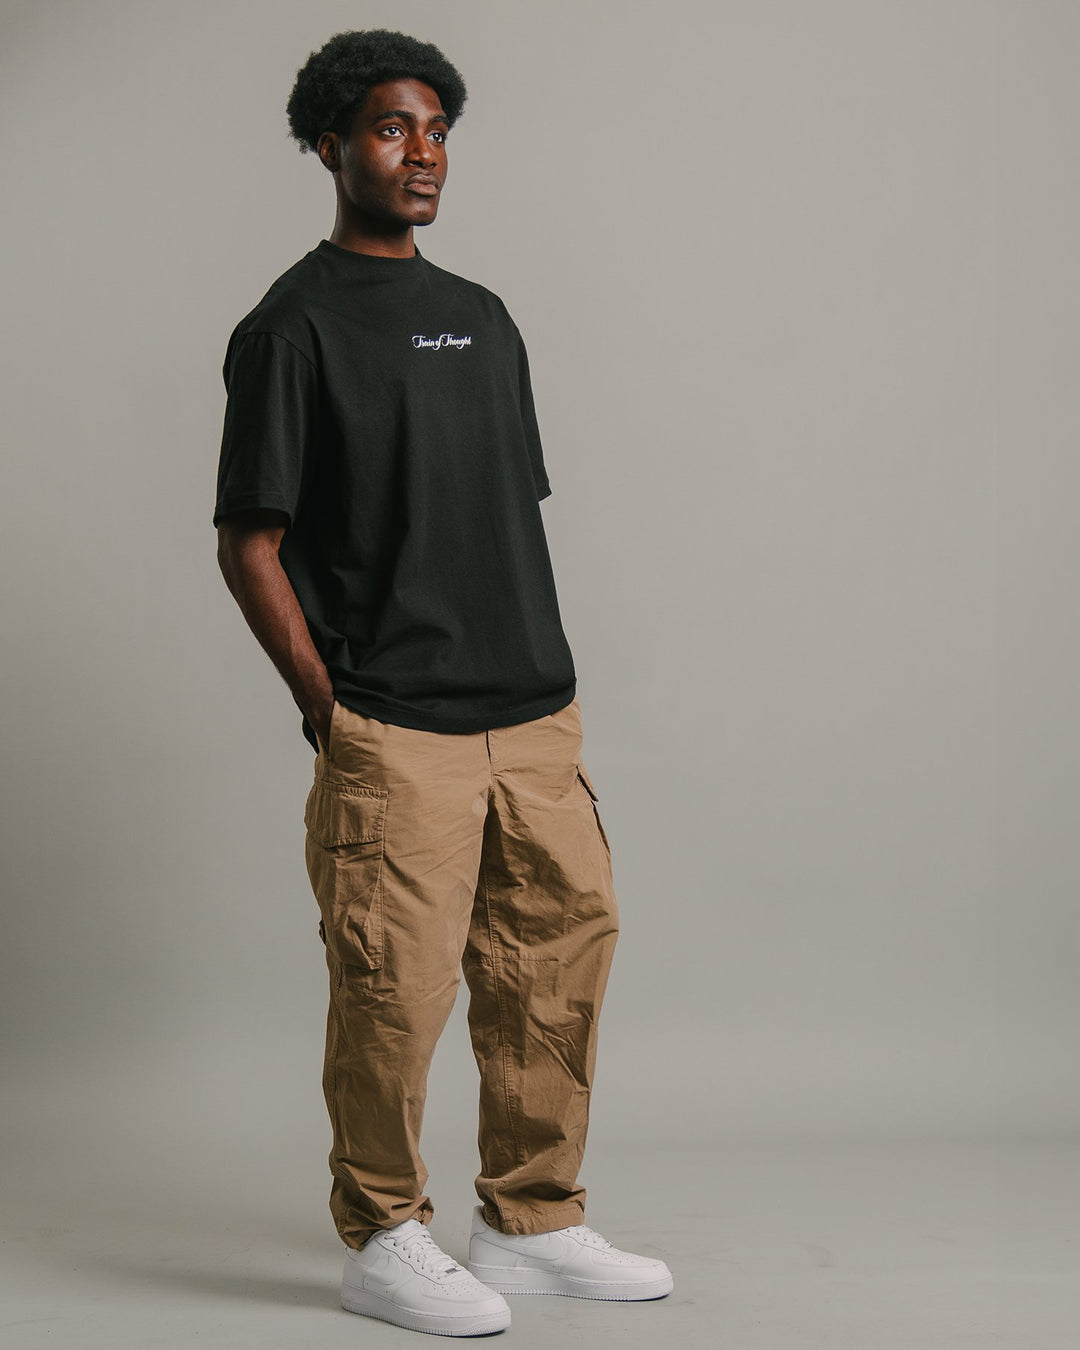 PAC Said Black Tee - trainofthoughtcollective